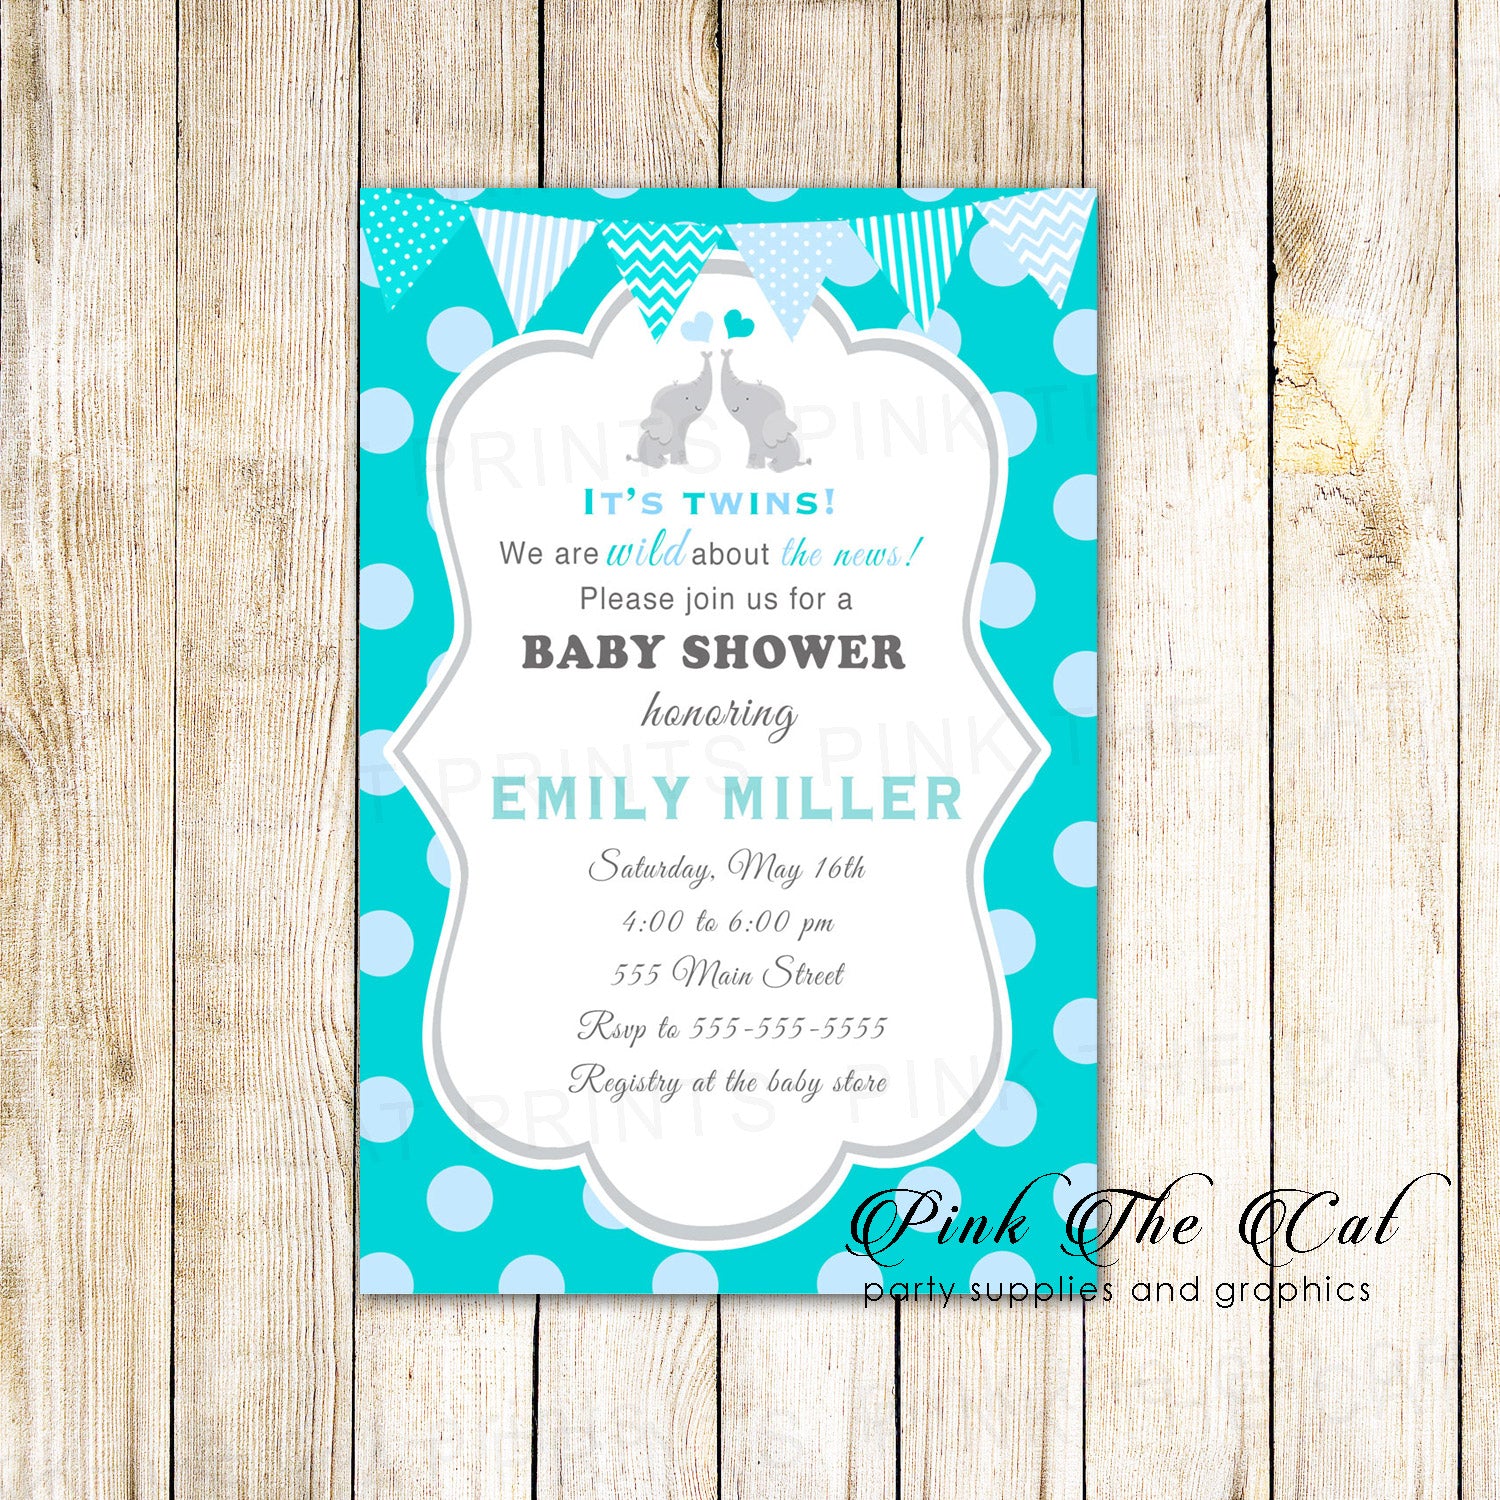 30 Elephant Invitations Baby Shower Teal Blue Twins Personalized